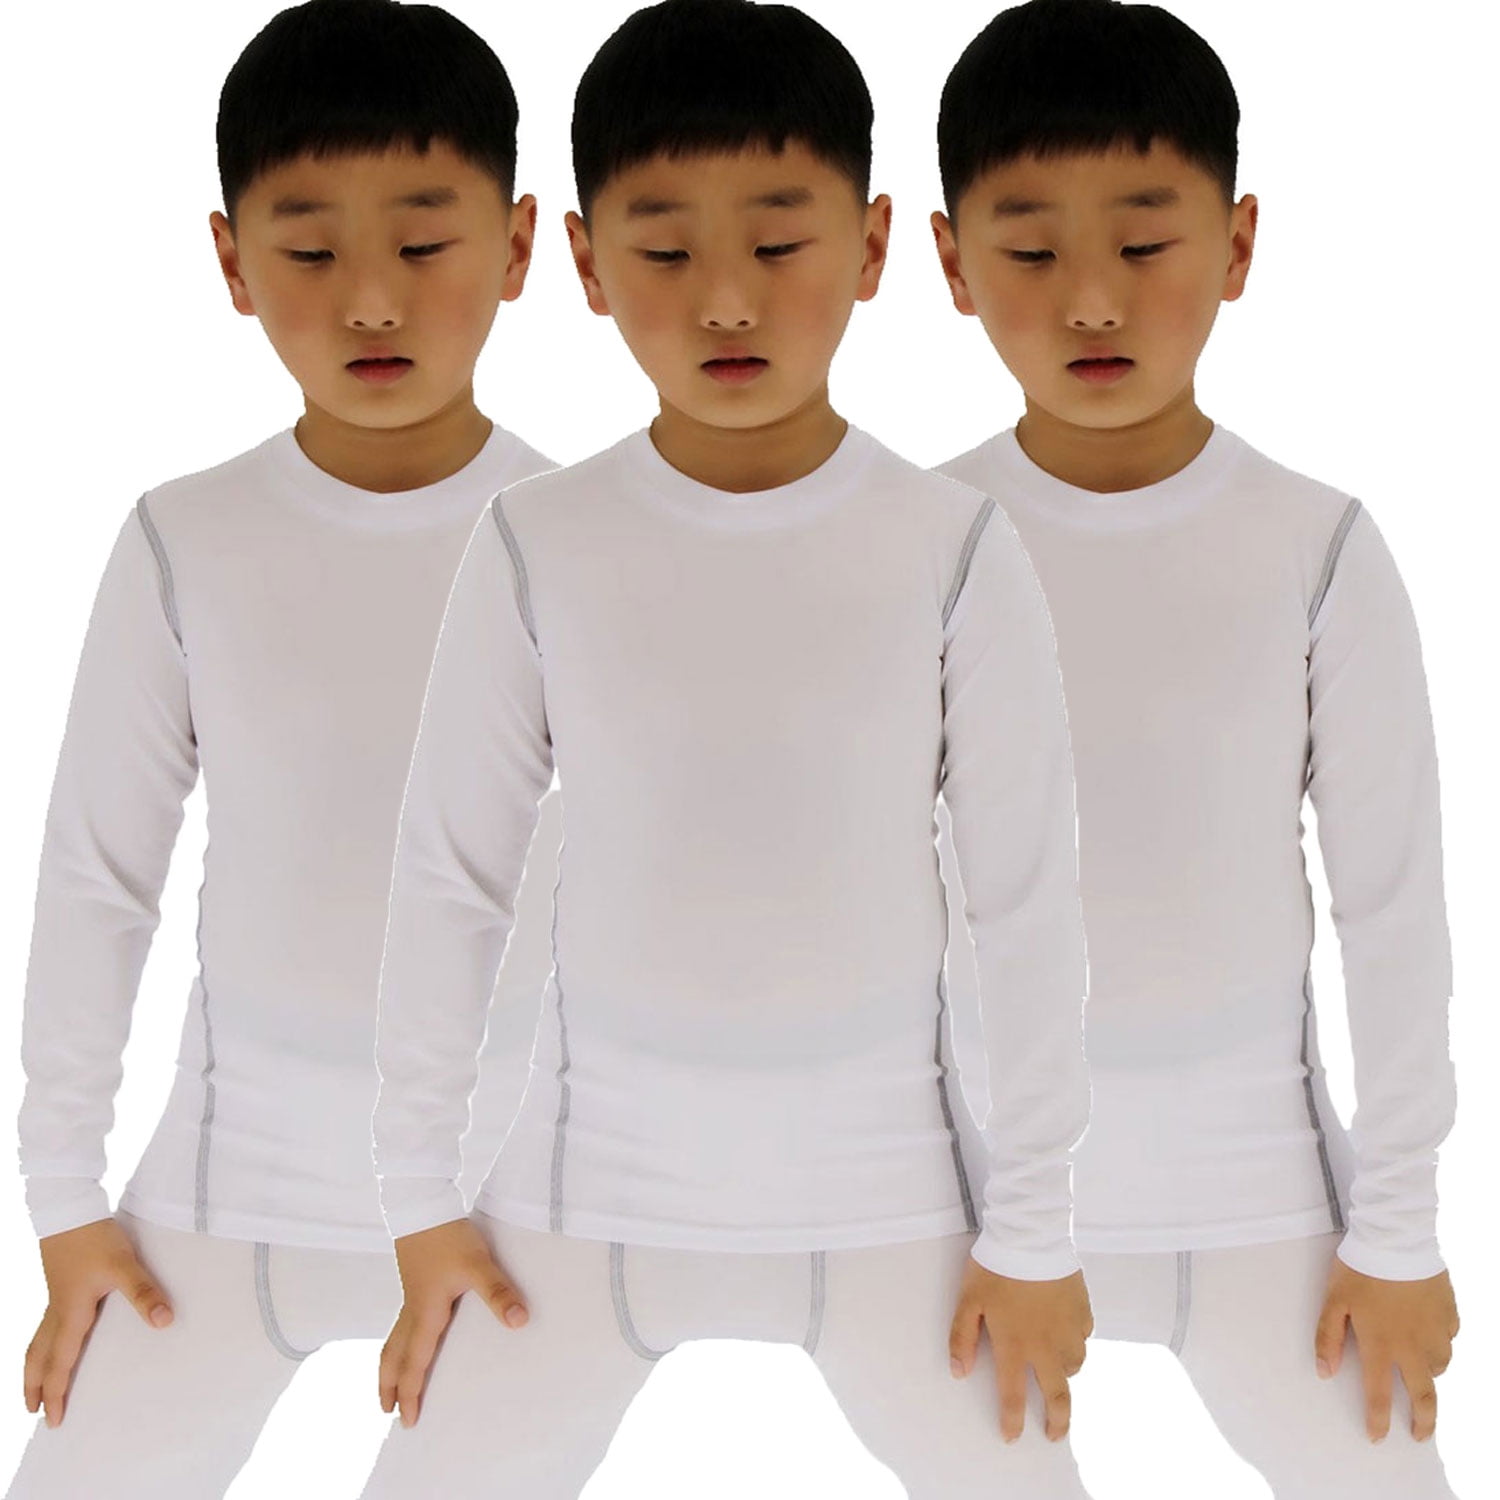 LANBAOSI Long Sleeve Compression Shirts for Boys 3 Pack Soccer